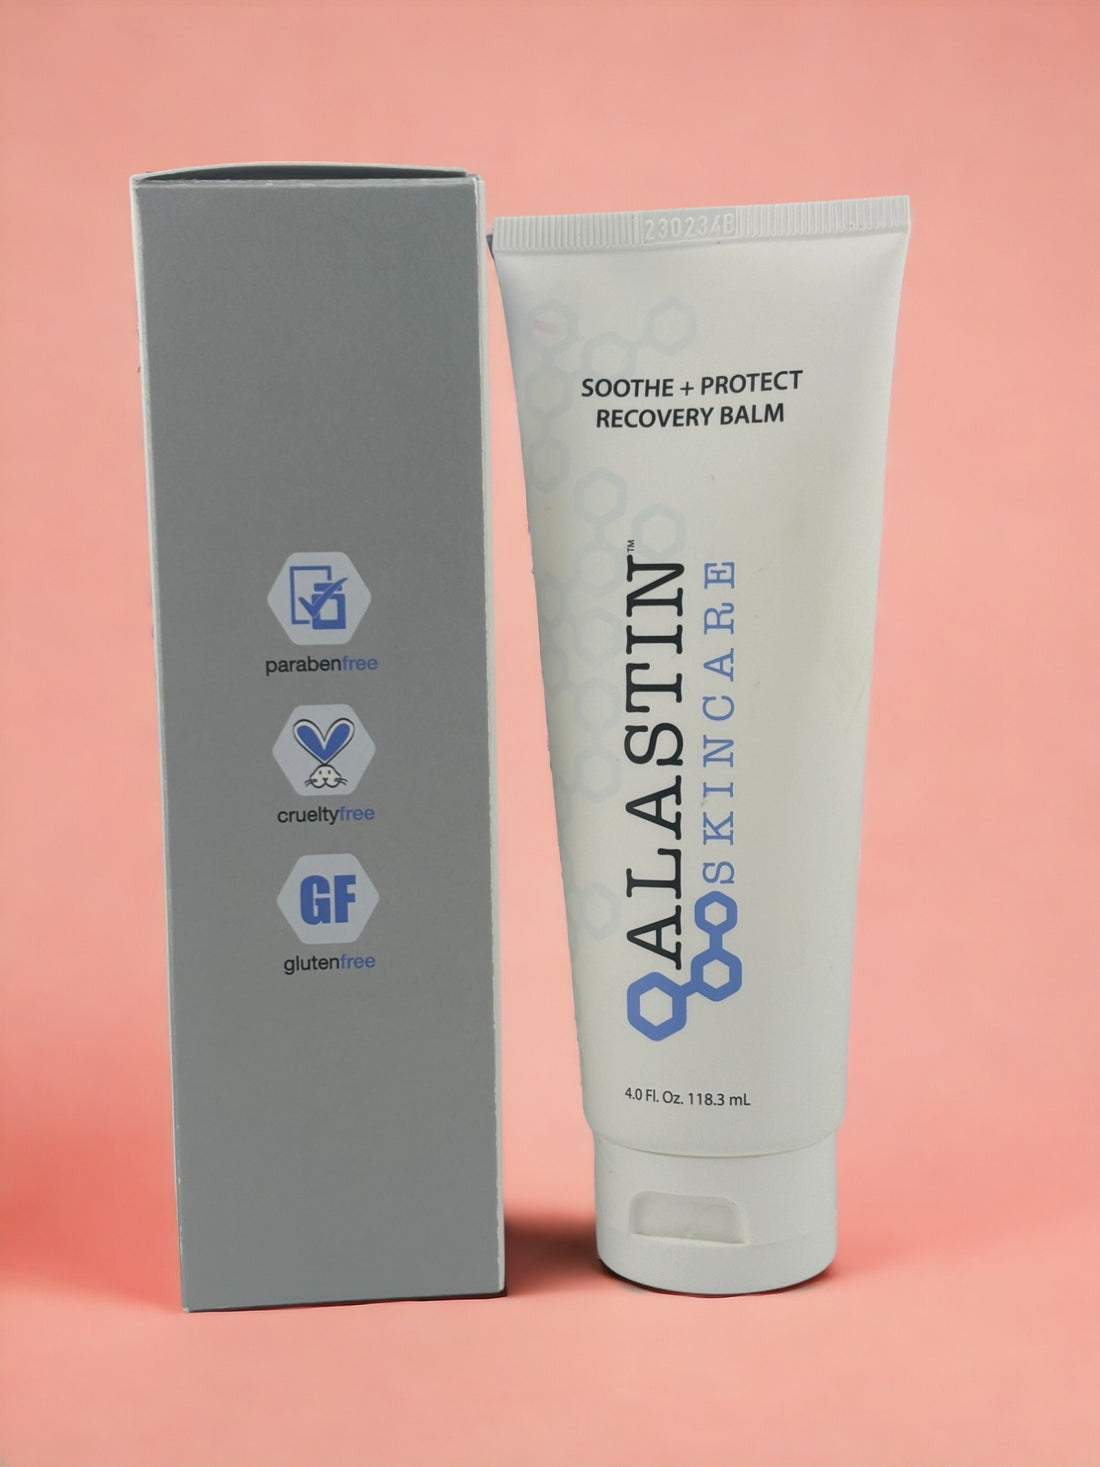 Soothe + Protect Recovery Balm